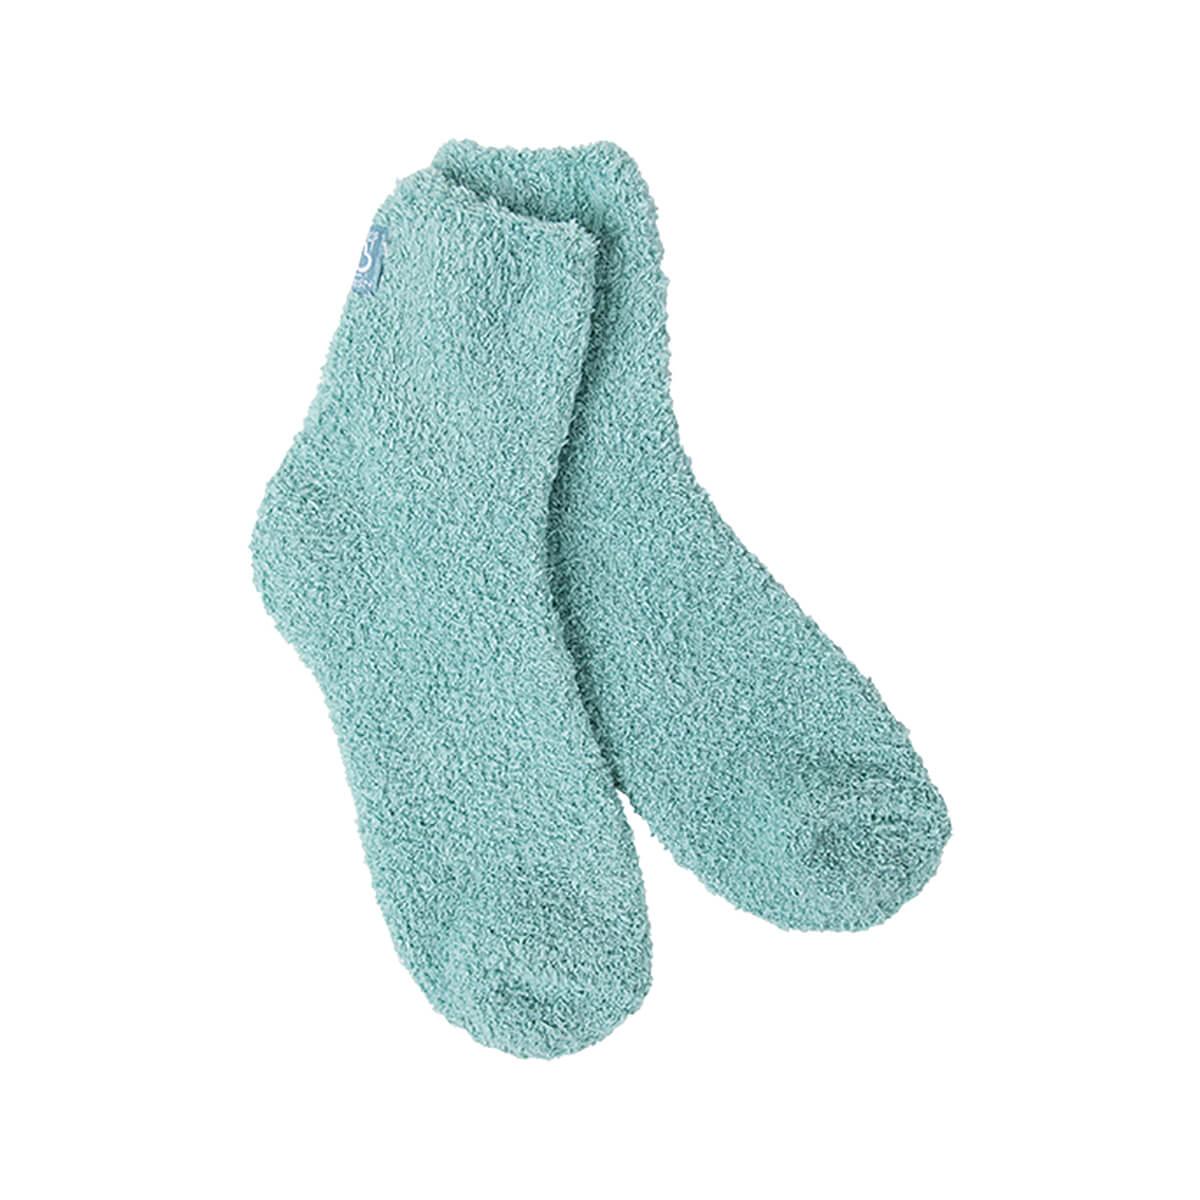 Mast General Store | Women's Cozy Quarter Socks with Grippers